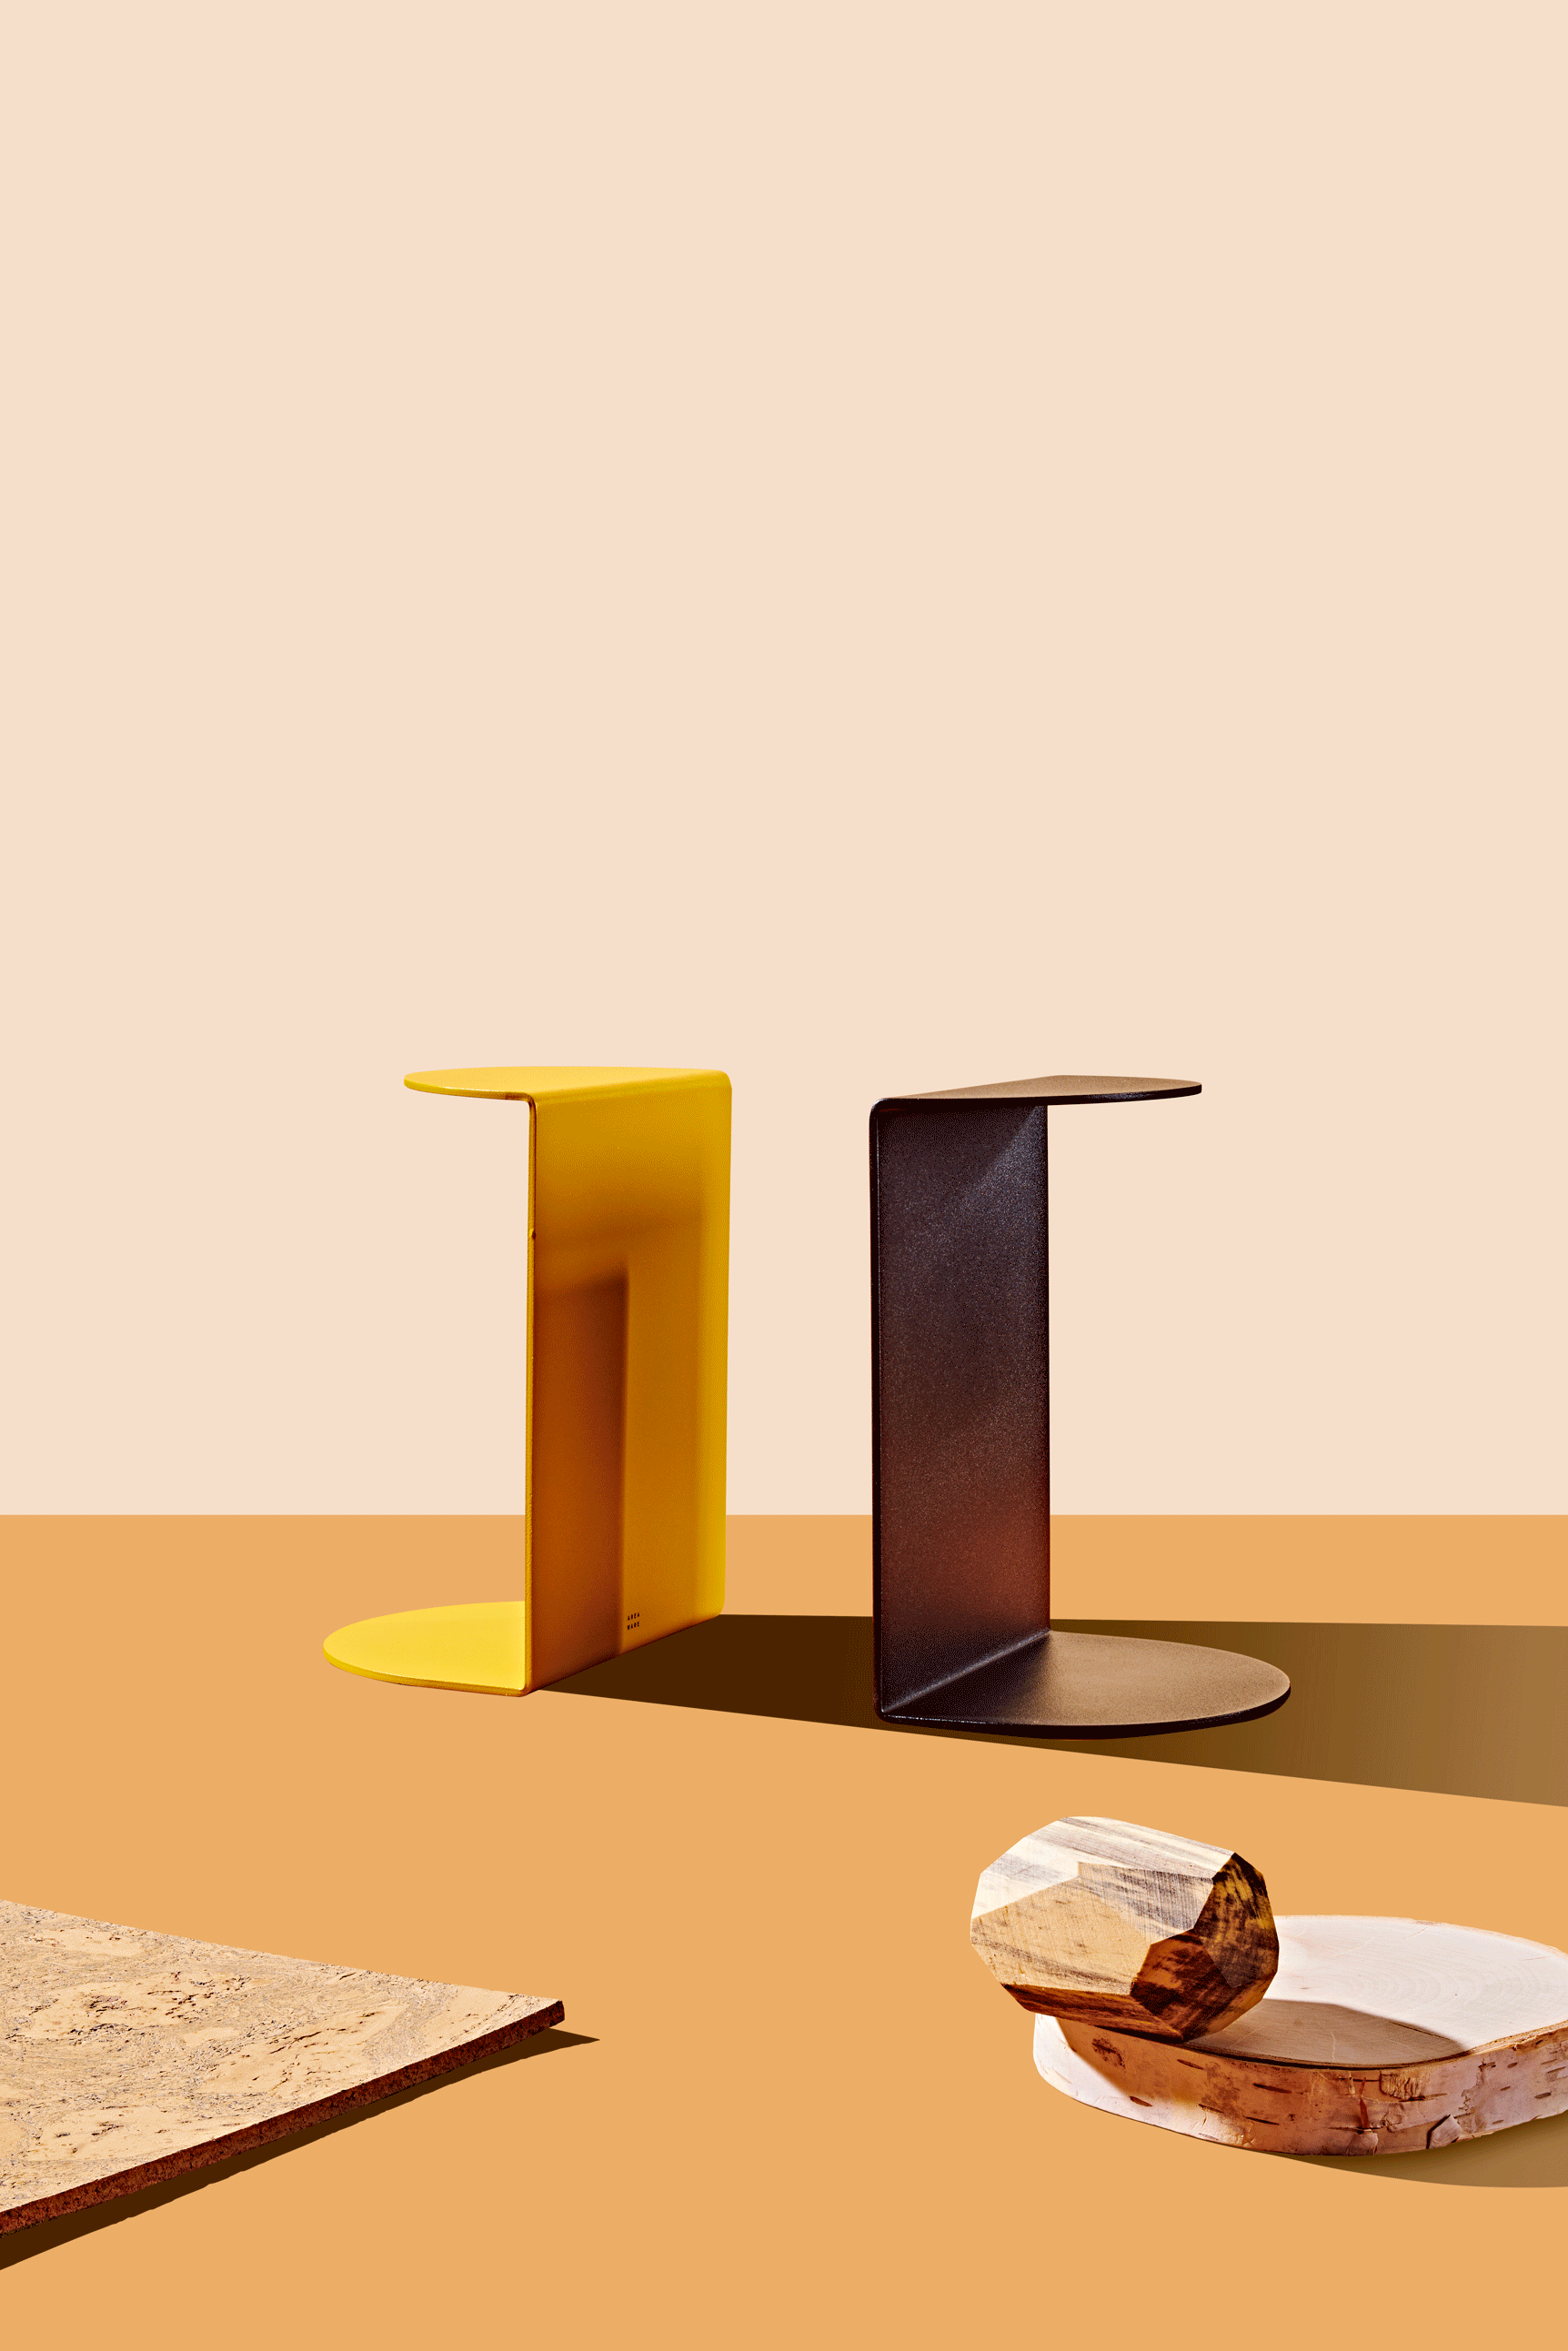 A yellow and black set of bookends sit on a flat surface while four books appear and disappear between them. These bookends are part of the Curbed Holiday Gift Guide 2019. This is an animated gif.